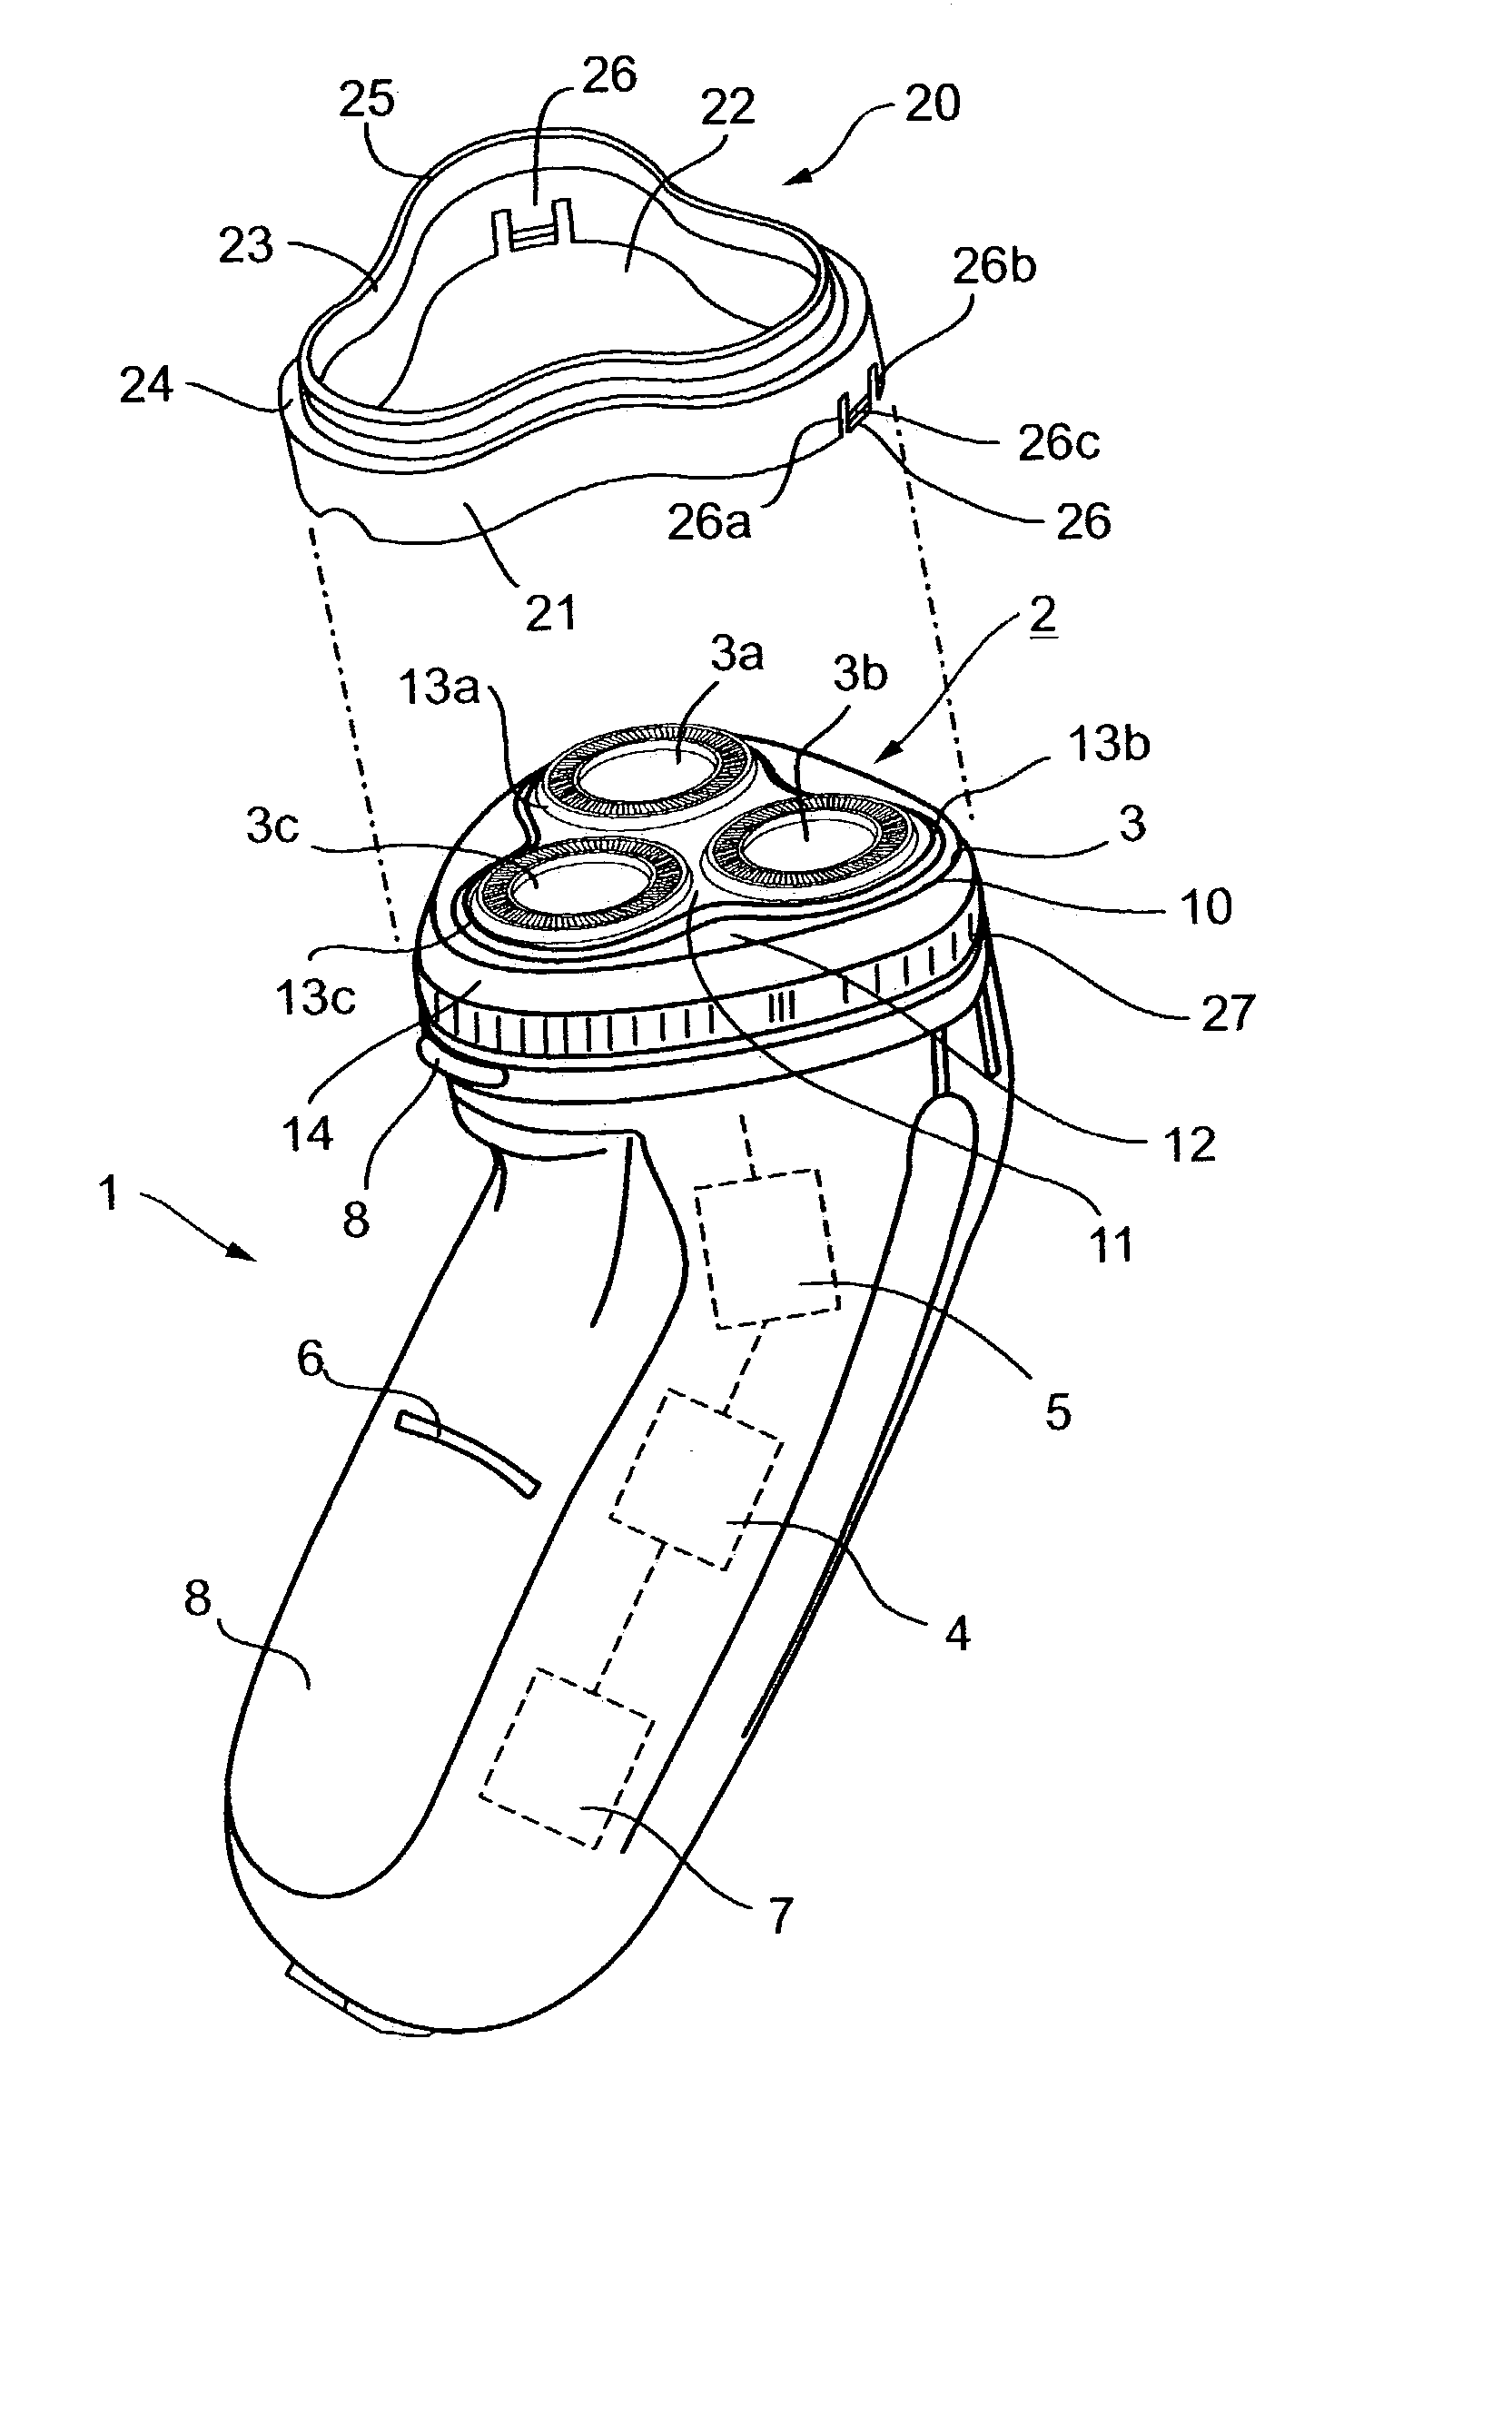 Attachments for electrical shaver and auxiliary cleaning device useful for electrical shaver